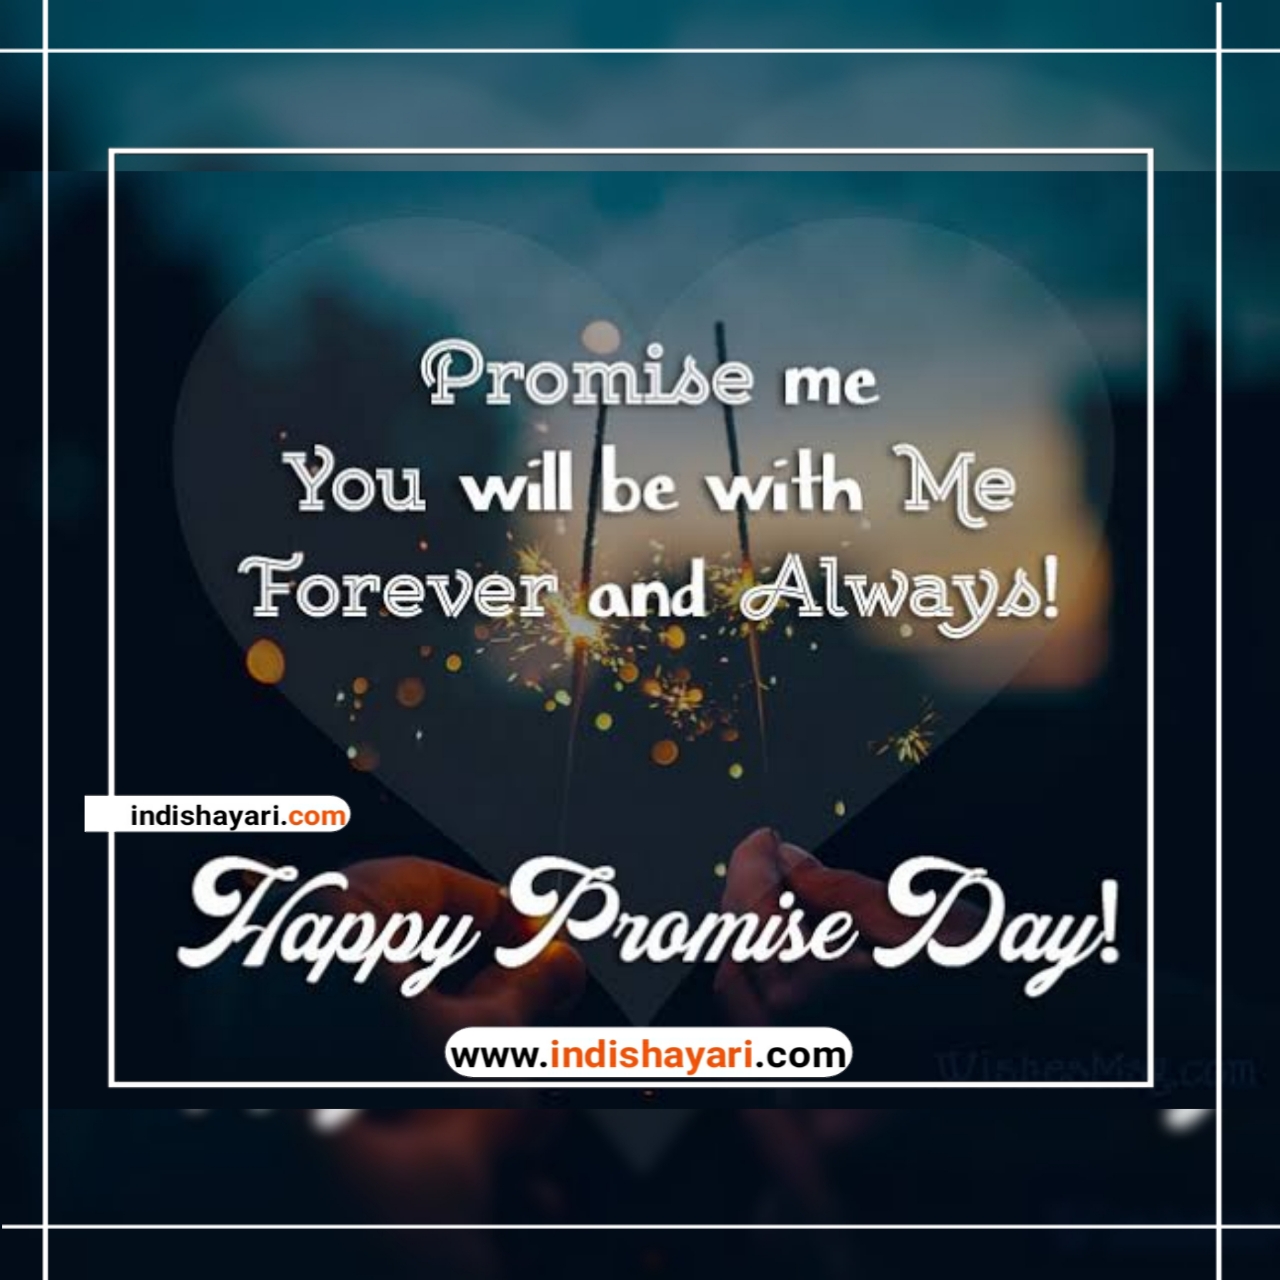 Happy Promise Day Quotes whishes greetings sms  images for whatsapp Facebook Instagram status